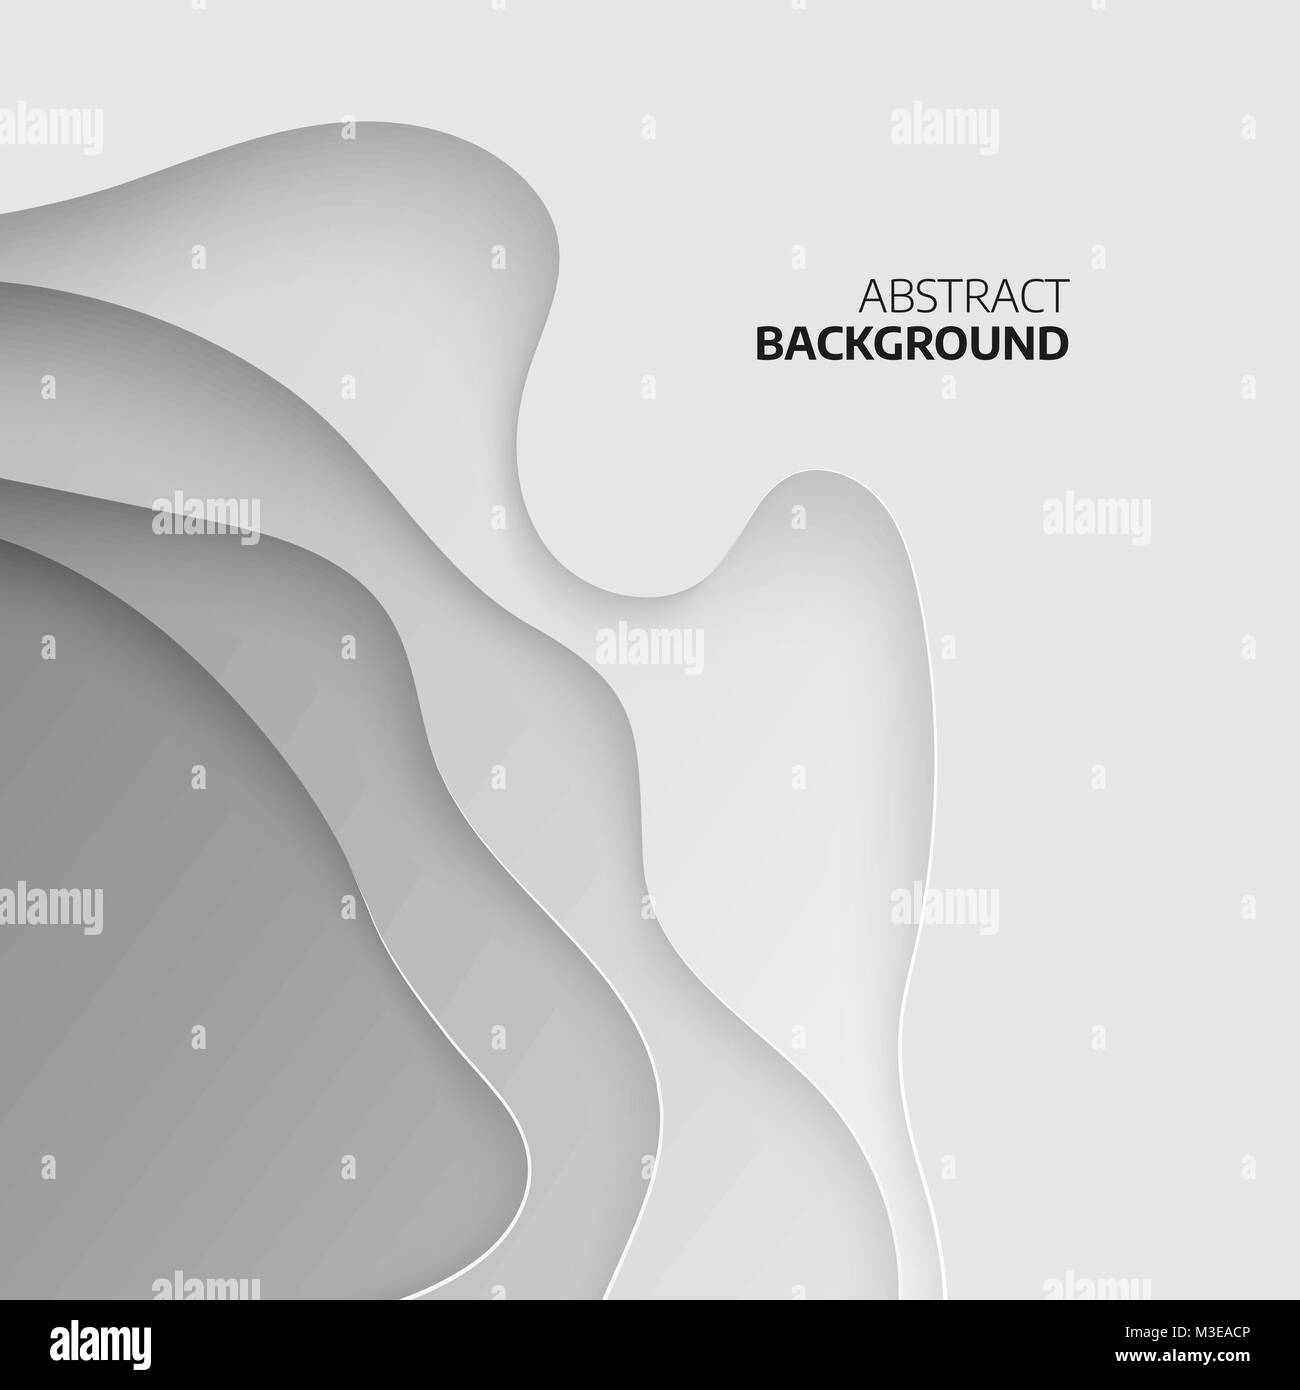 Abstract topographic background. 3D papercut layers. Abstract paper cut art background design for website template. Topography map concept. Vector ill Stock Vector